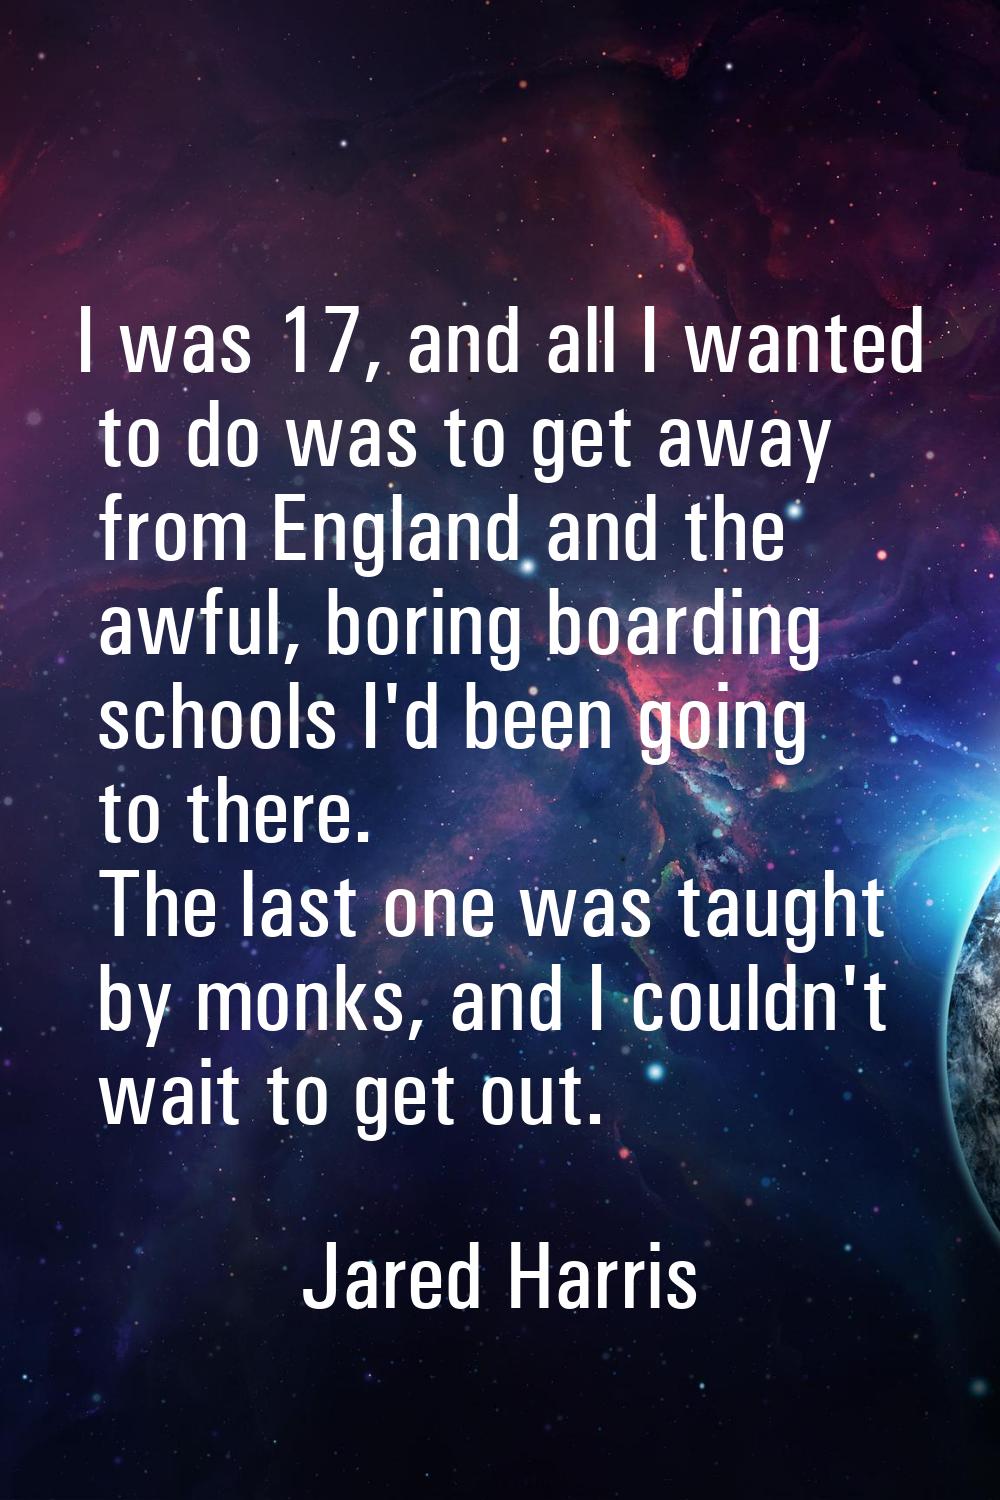 I was 17, and all I wanted to do was to get away from England and the awful, boring boarding school